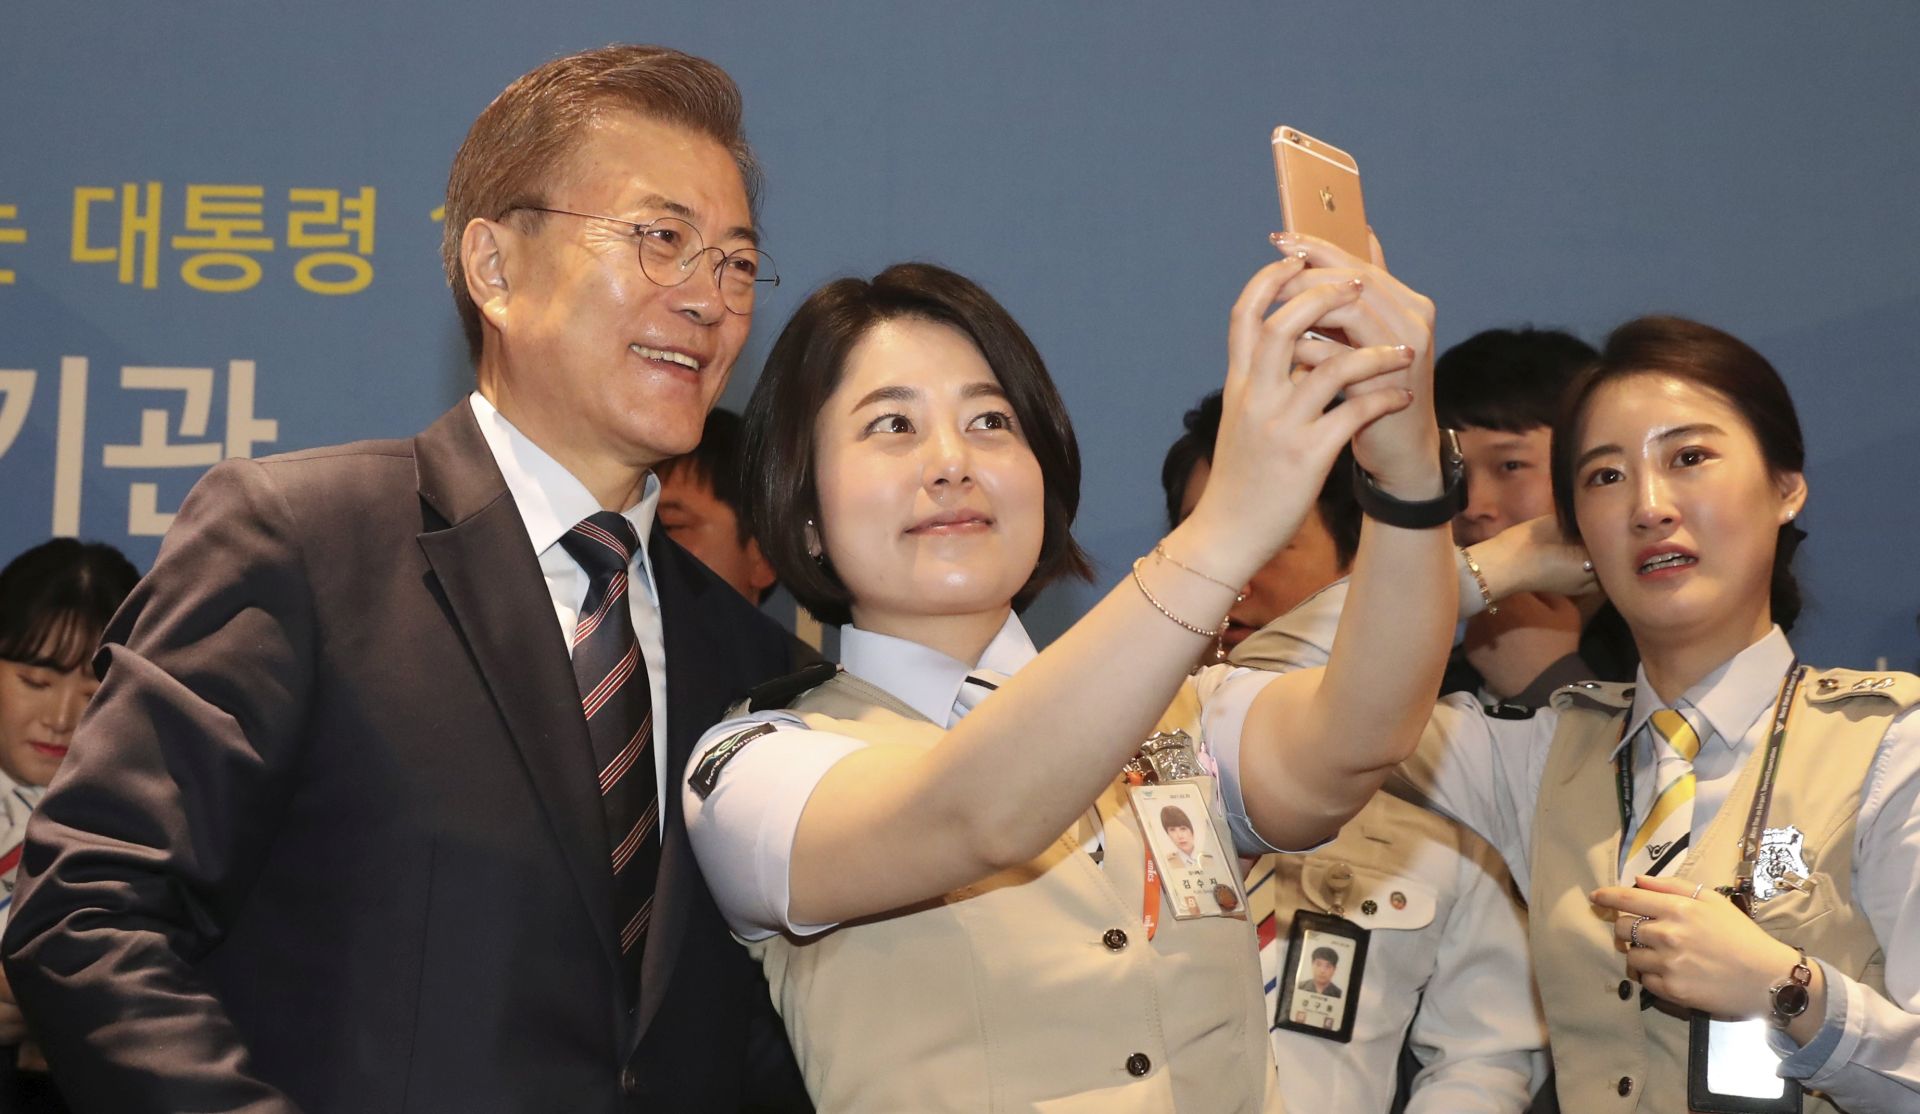 epa05958590 An employee of Incheon International Airport Corp. (IIAC) takes a selfie with South Korean President Moon Jae-in (L) during an event at the airport on Yeongjong Island, Incheon, South Korea, 12 May 2017.  EPA/YONHAP SOUTH KOREA OUT